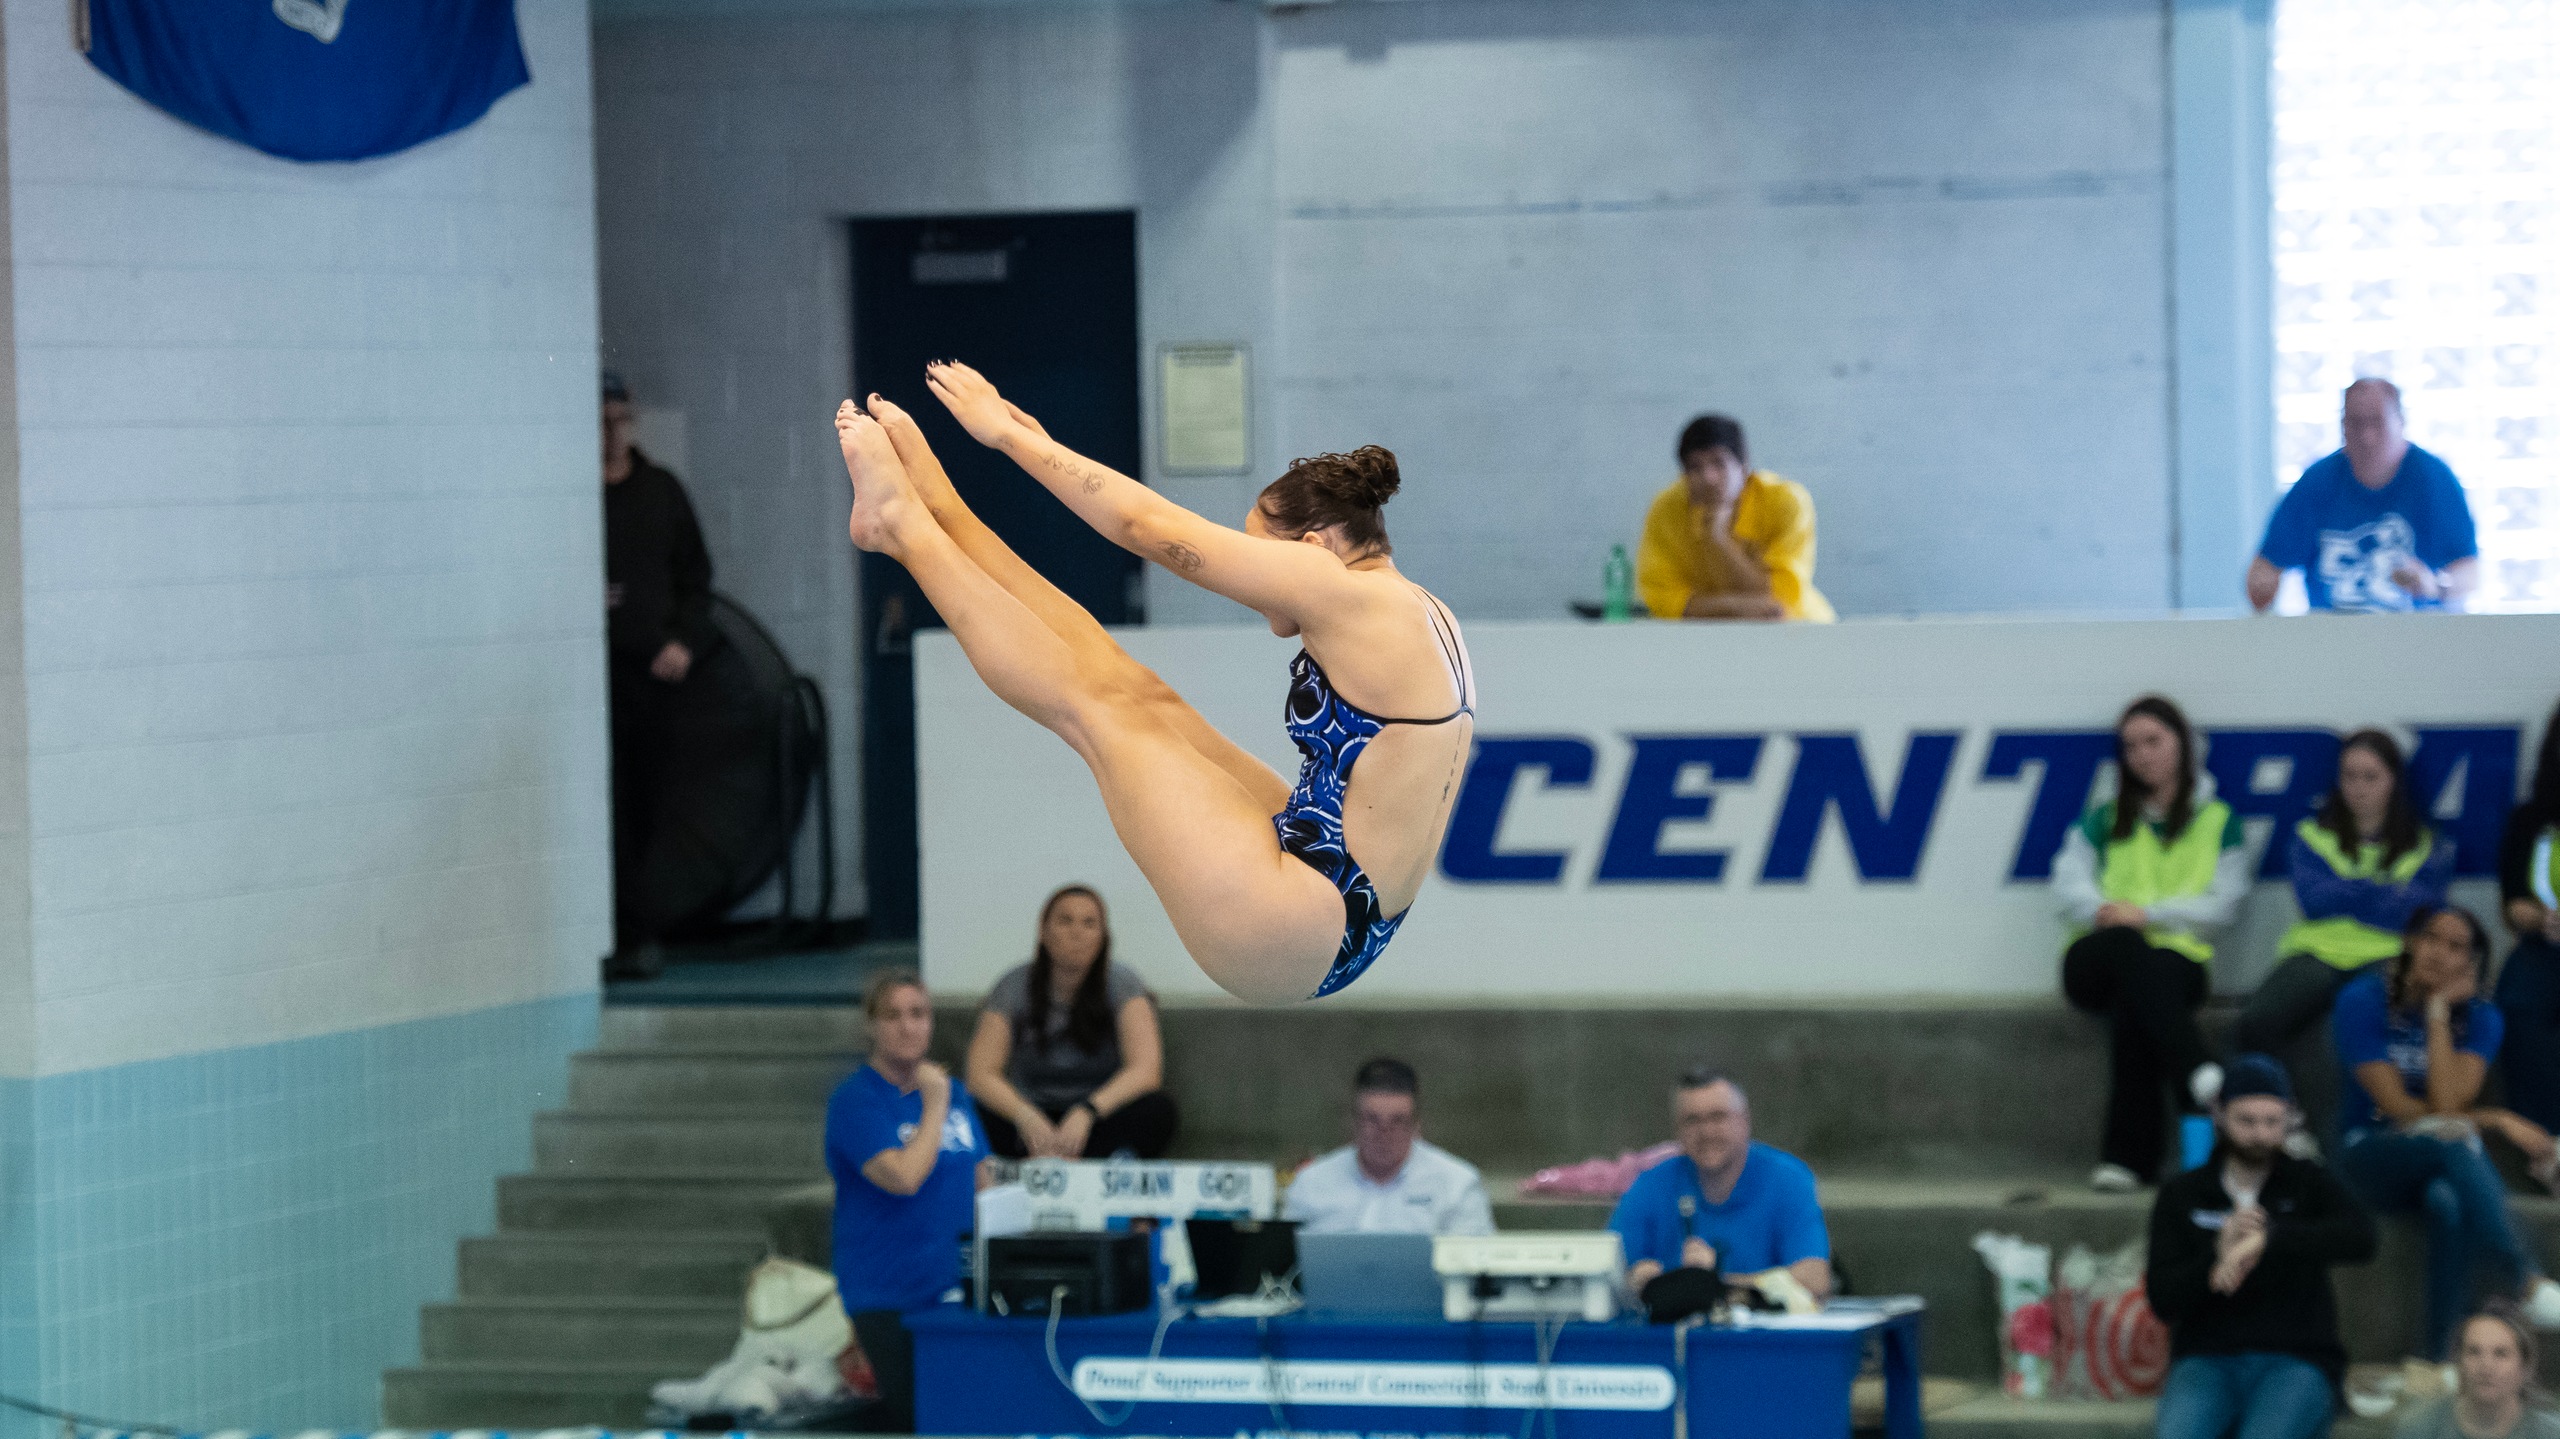 Zoe Baker placed third and fifth in the 2023-24 debut or the CCSU divers at the Fairfield Invitational. (Photo: Steve McLaughlin)